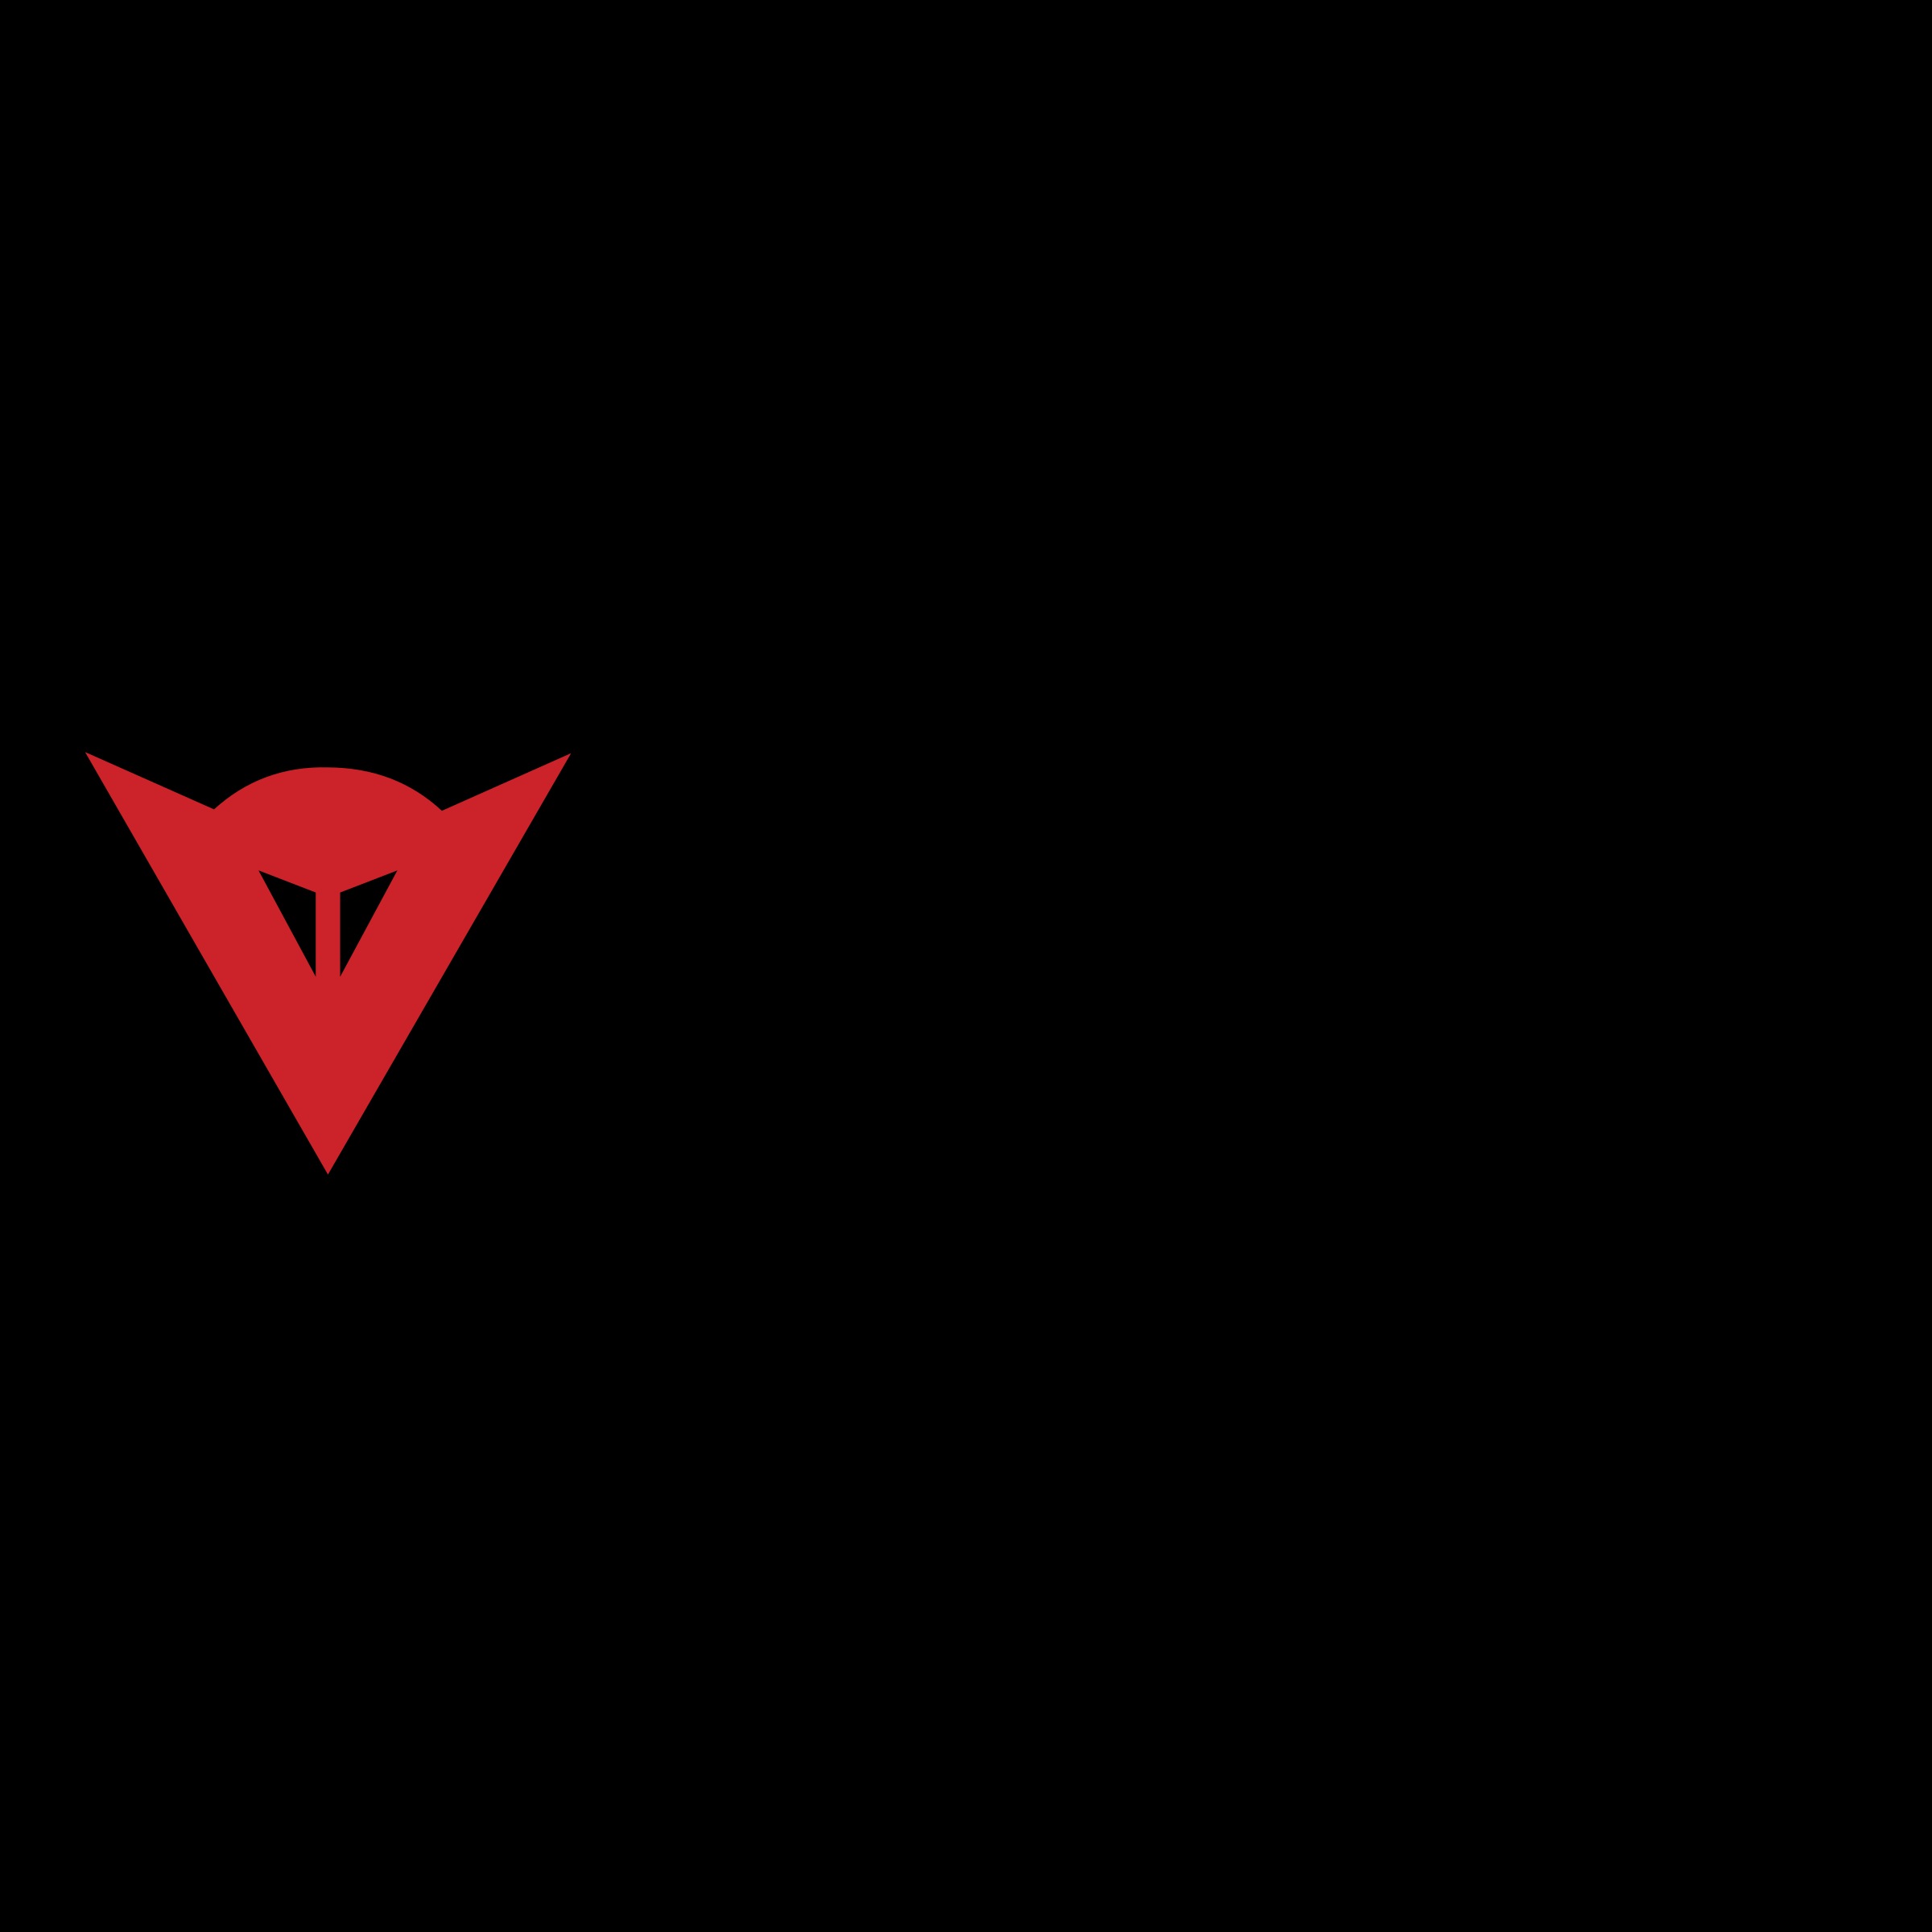 Dainese Logo - Dainese Logo PNG Transparent & SVG Vector